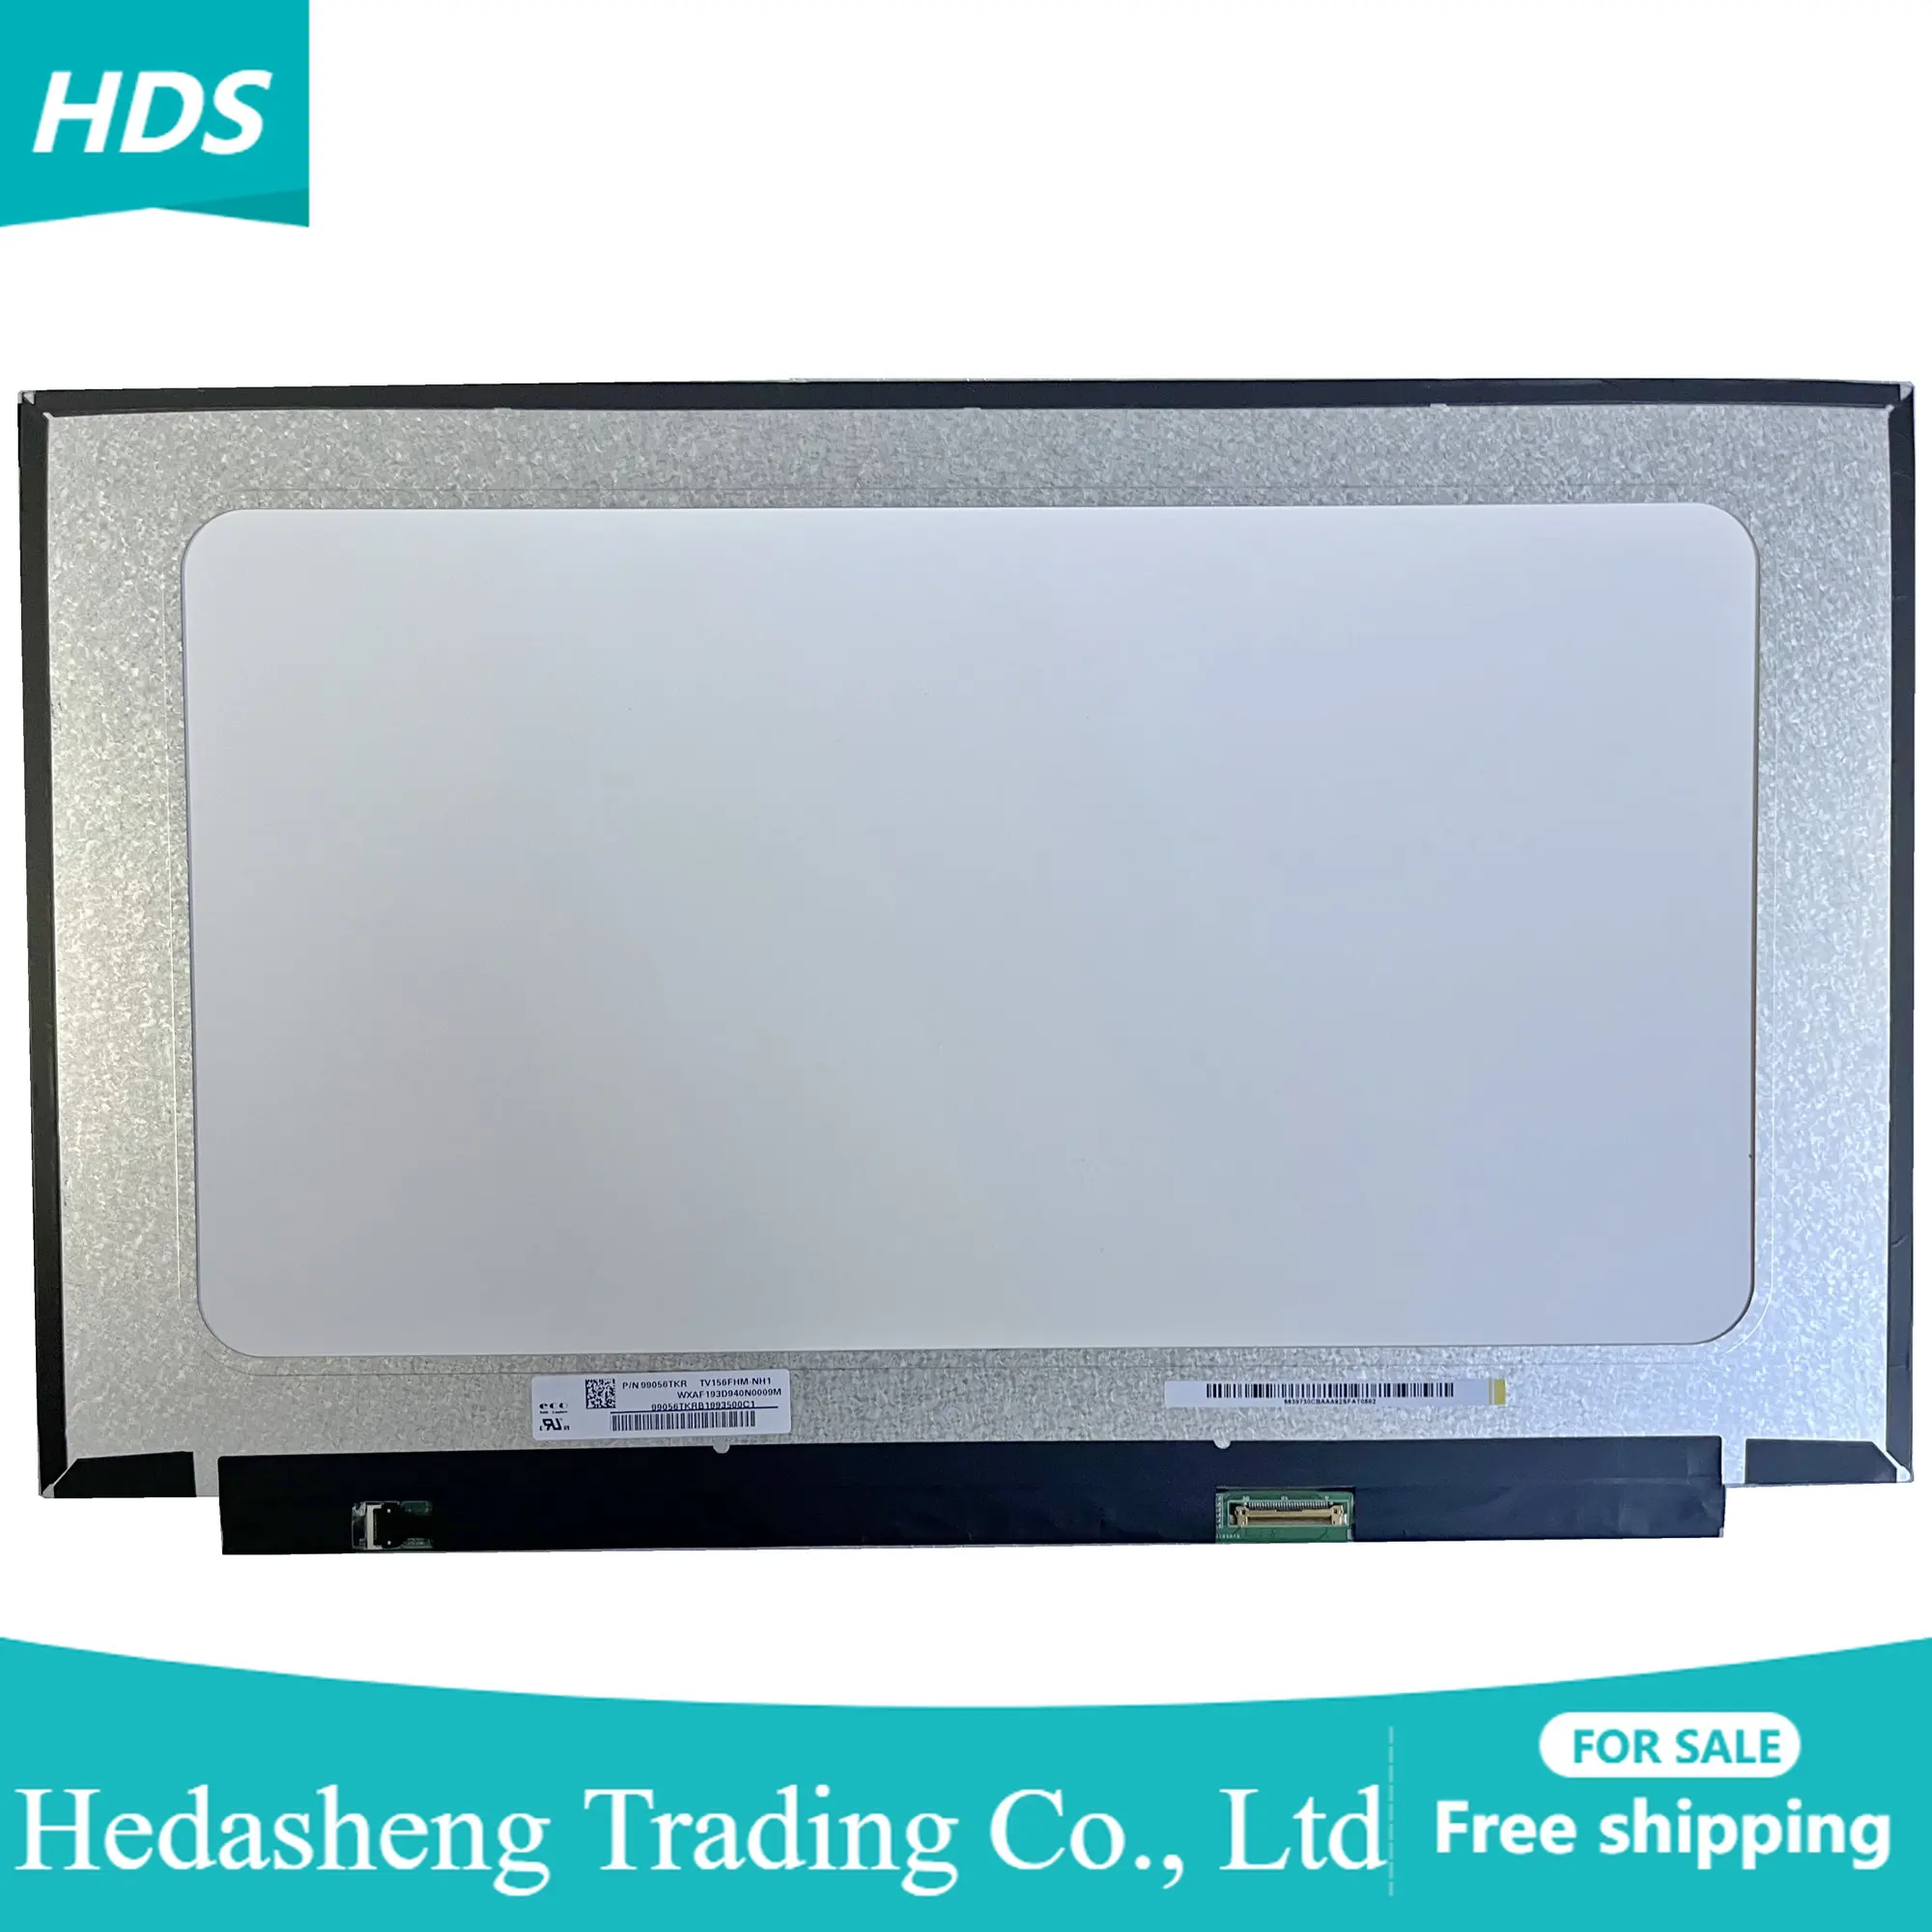 

TV156FHM-NH1 30 Pins FHD 15.6"inch Laptop LCD Screen IPS Matrix for Honor Magicbook 15 LED 1920X1080